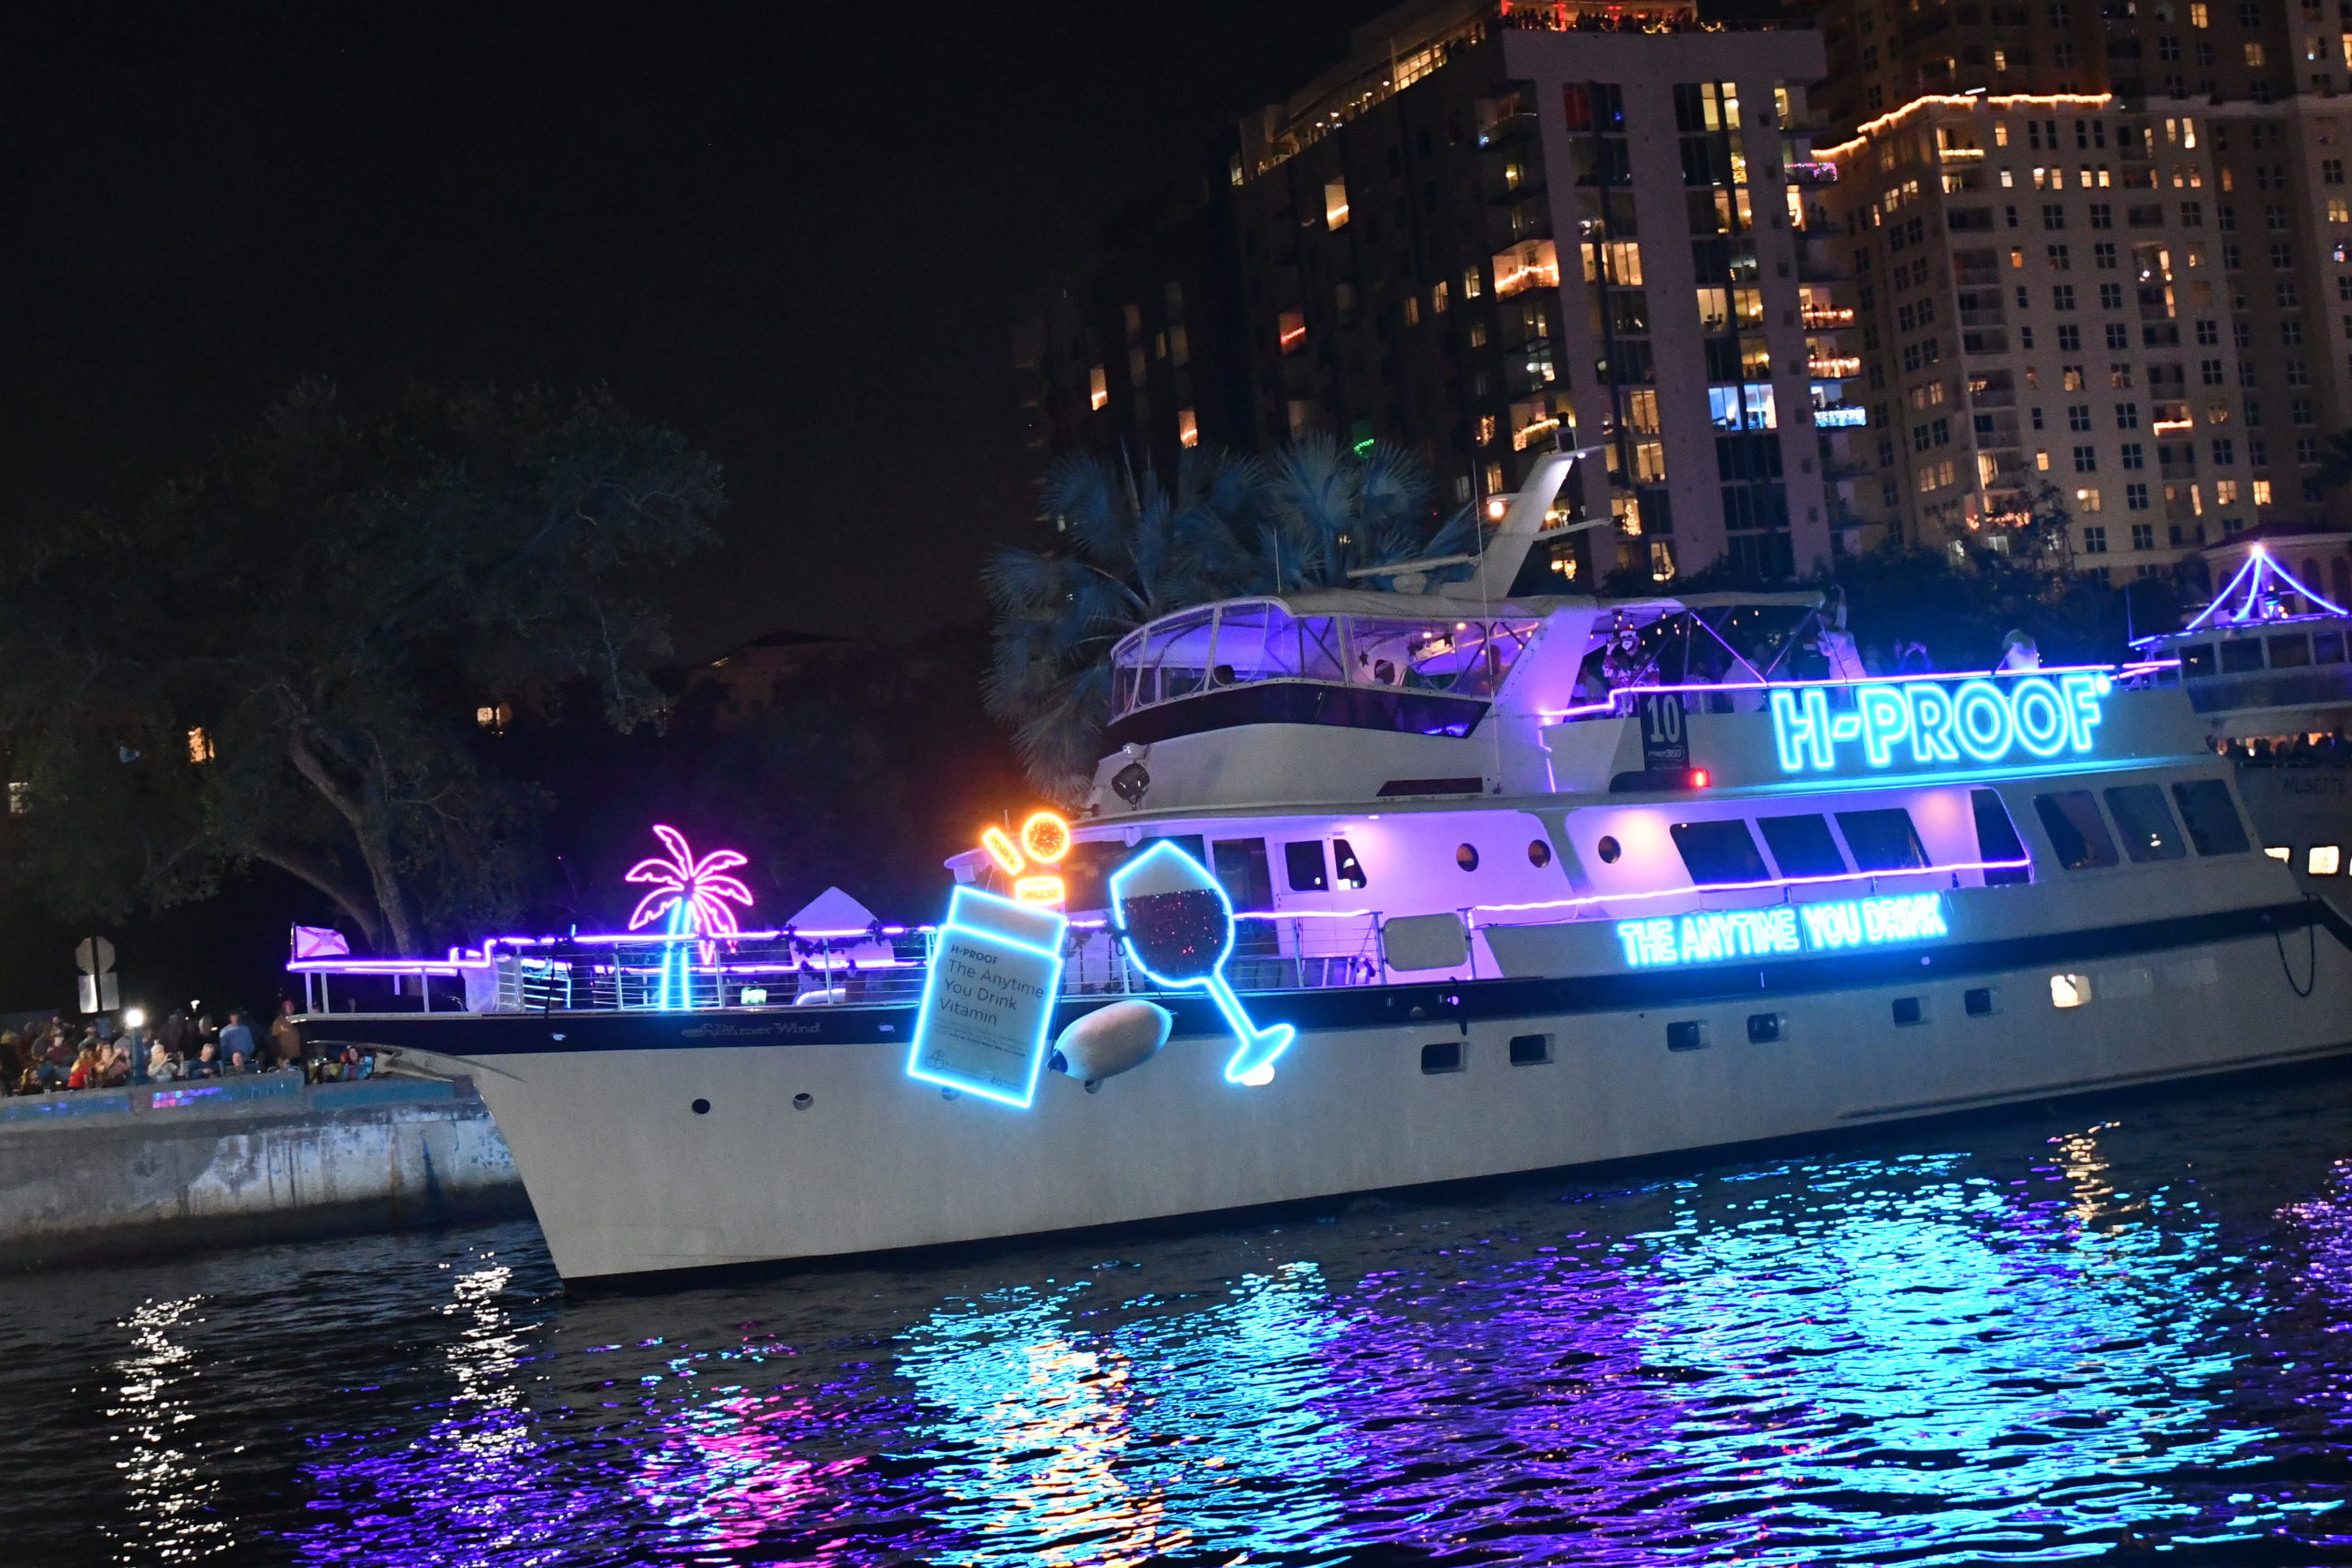 The Summer Wind, boat number 10 in the 2022 Winterfest Boat Parade